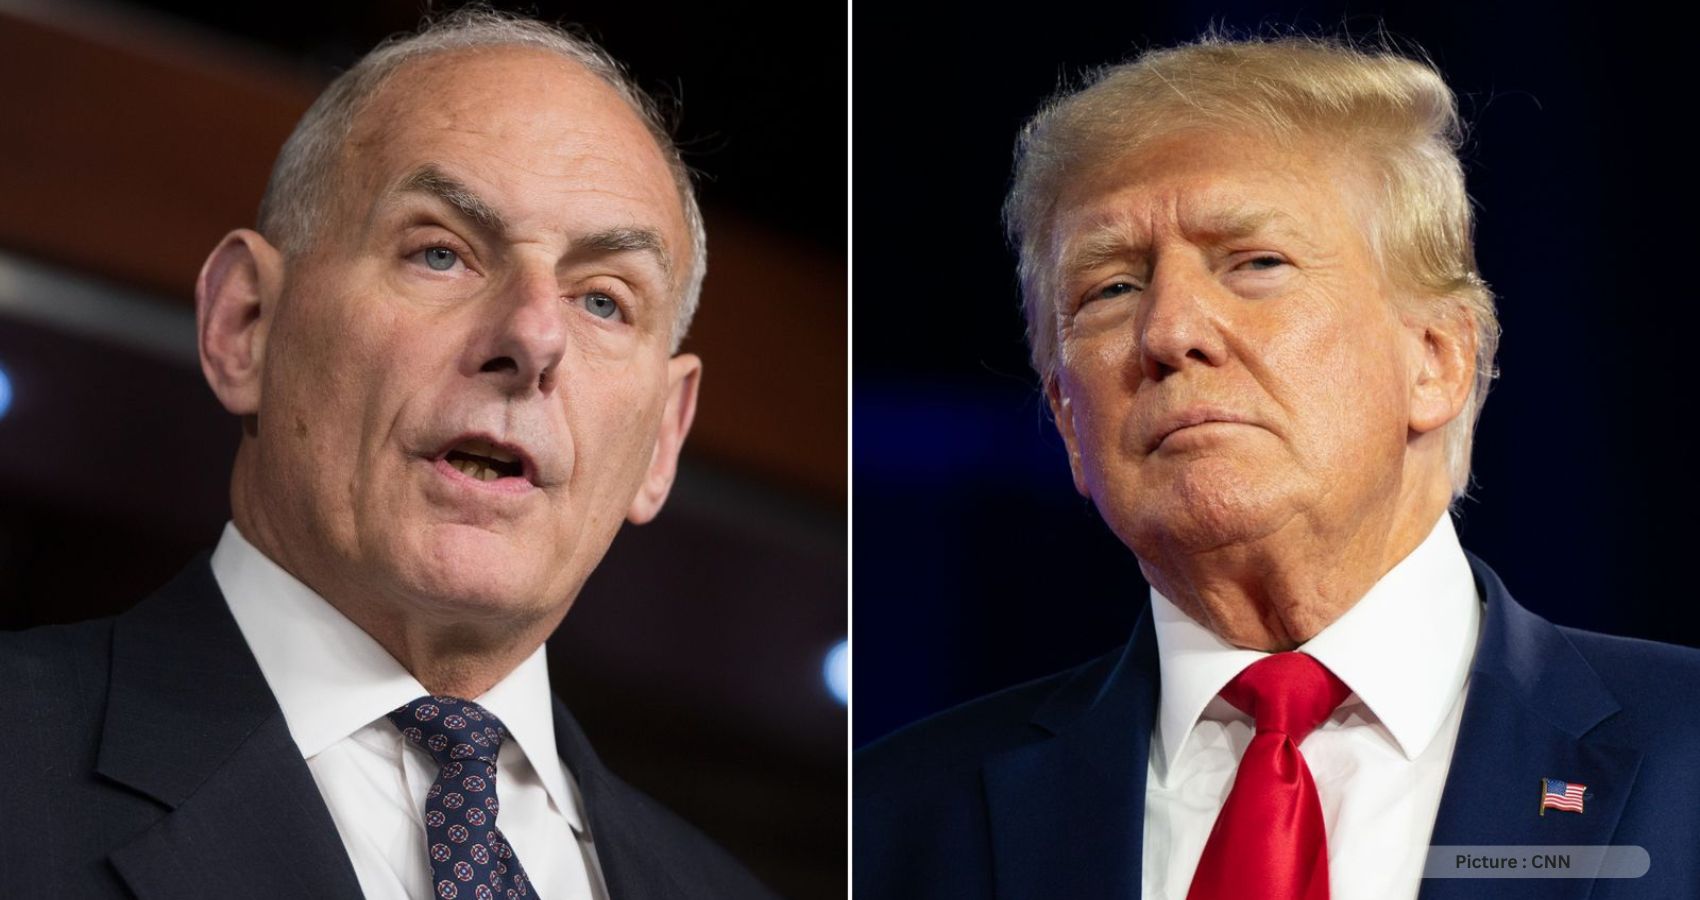 Trump’s WH Chief Of Staff John Kelly Confirms Disturbing Stories About Trump